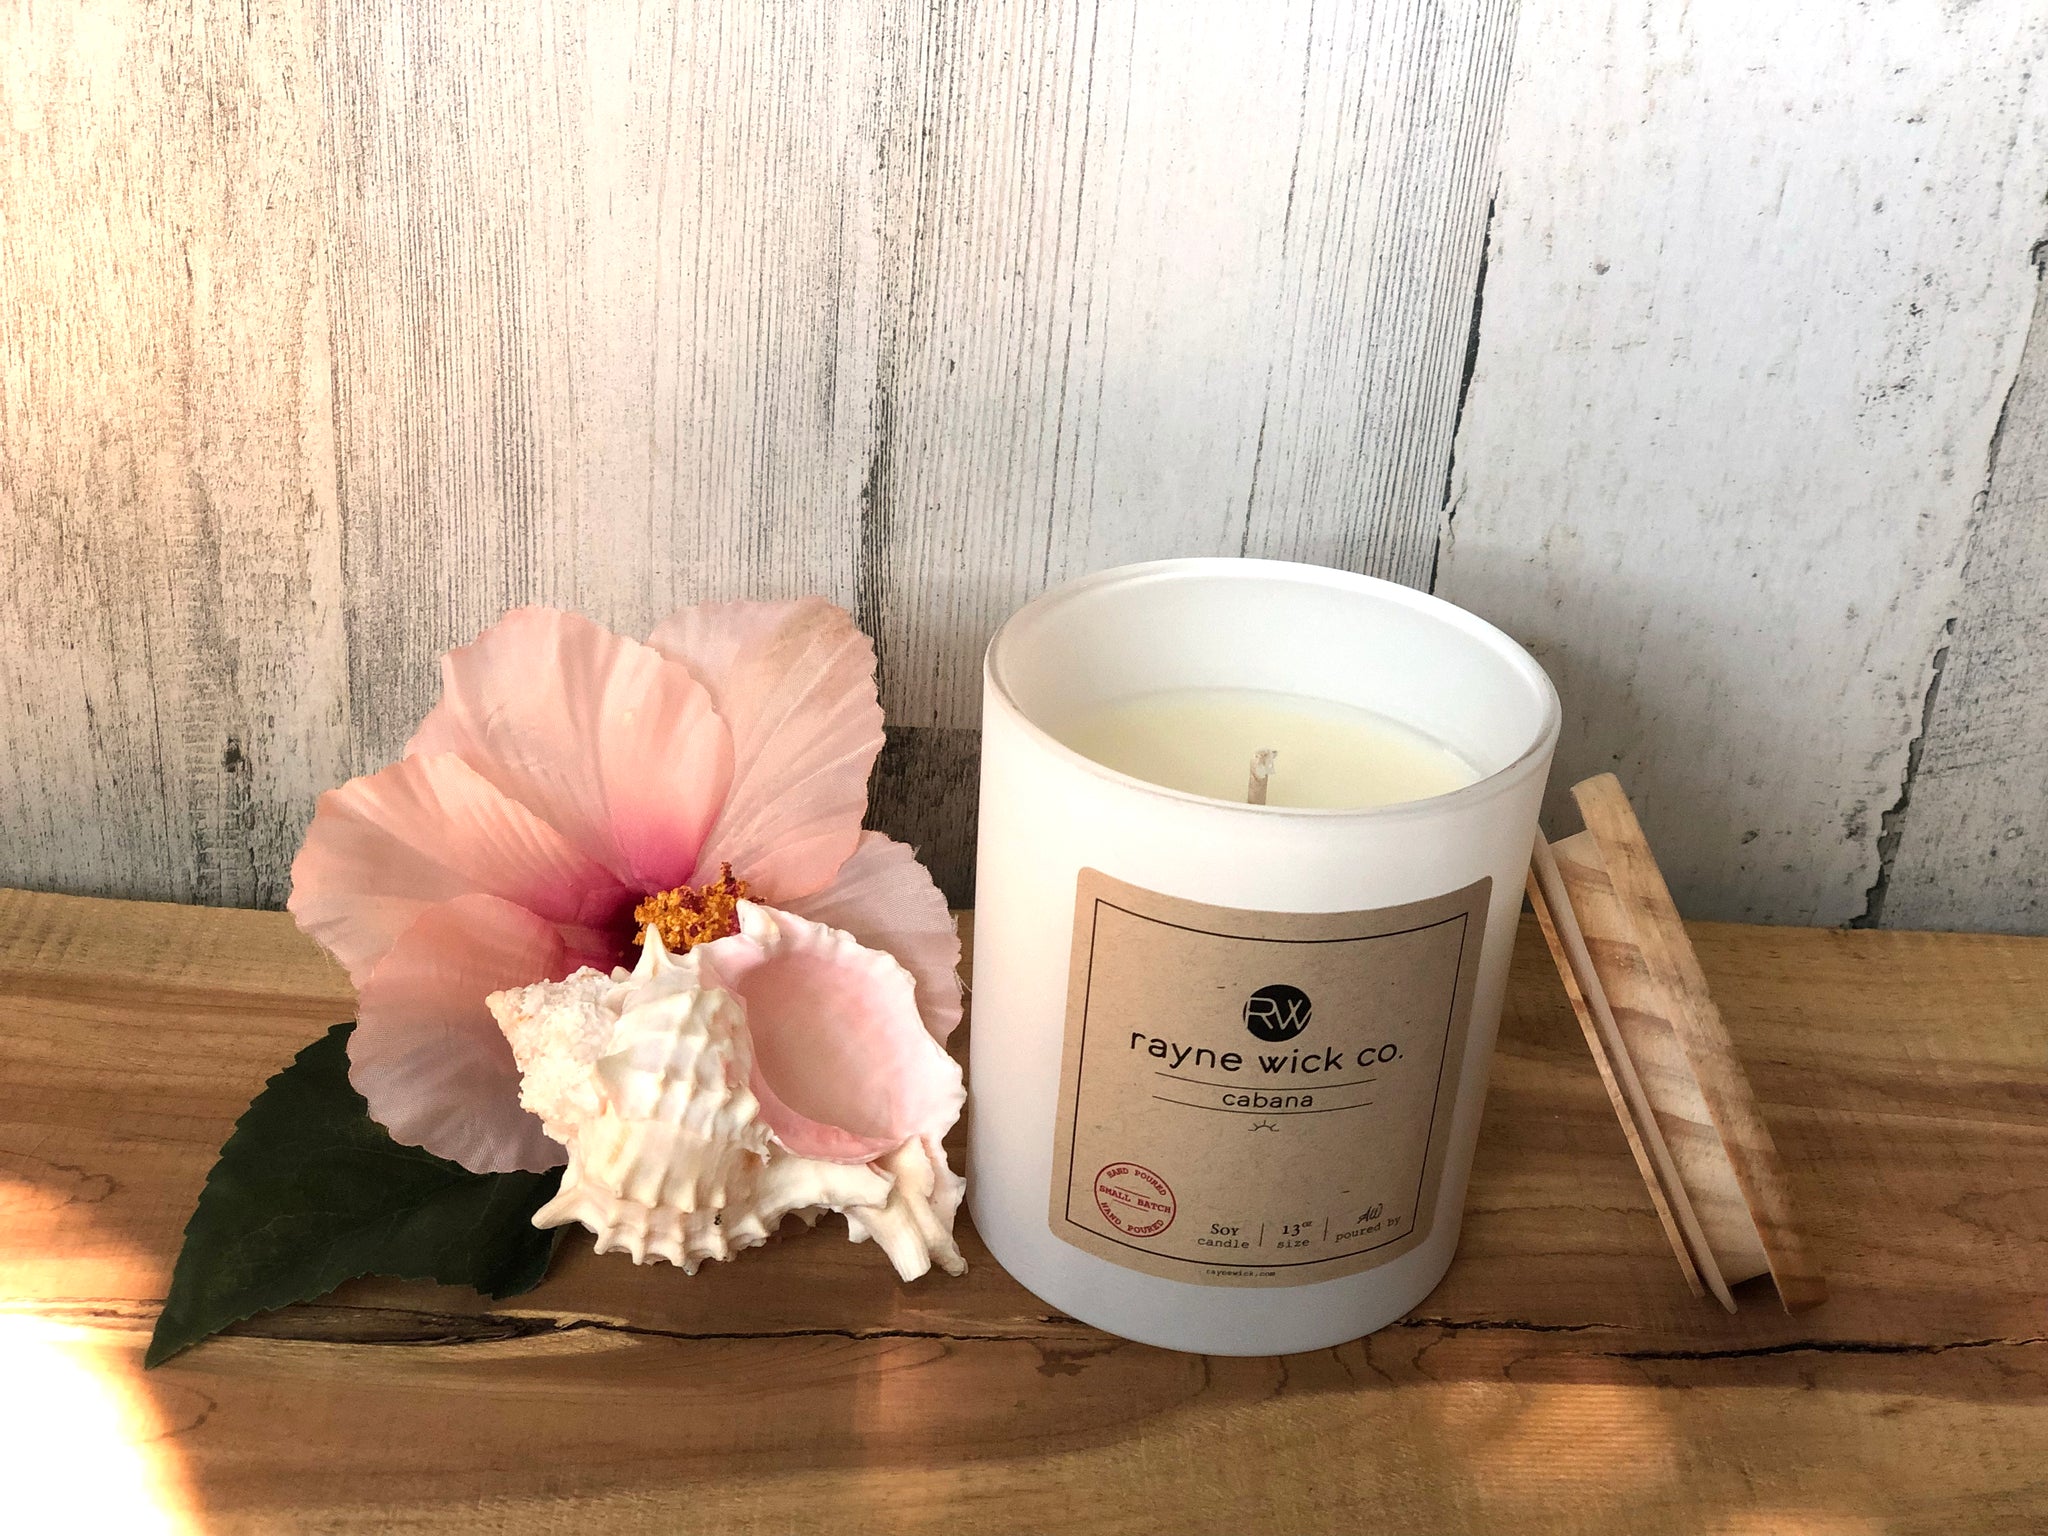 Cotton Candy Sky - 13 oz Wood Wick Soy Candle — Cellar Door Bath Supply Co.